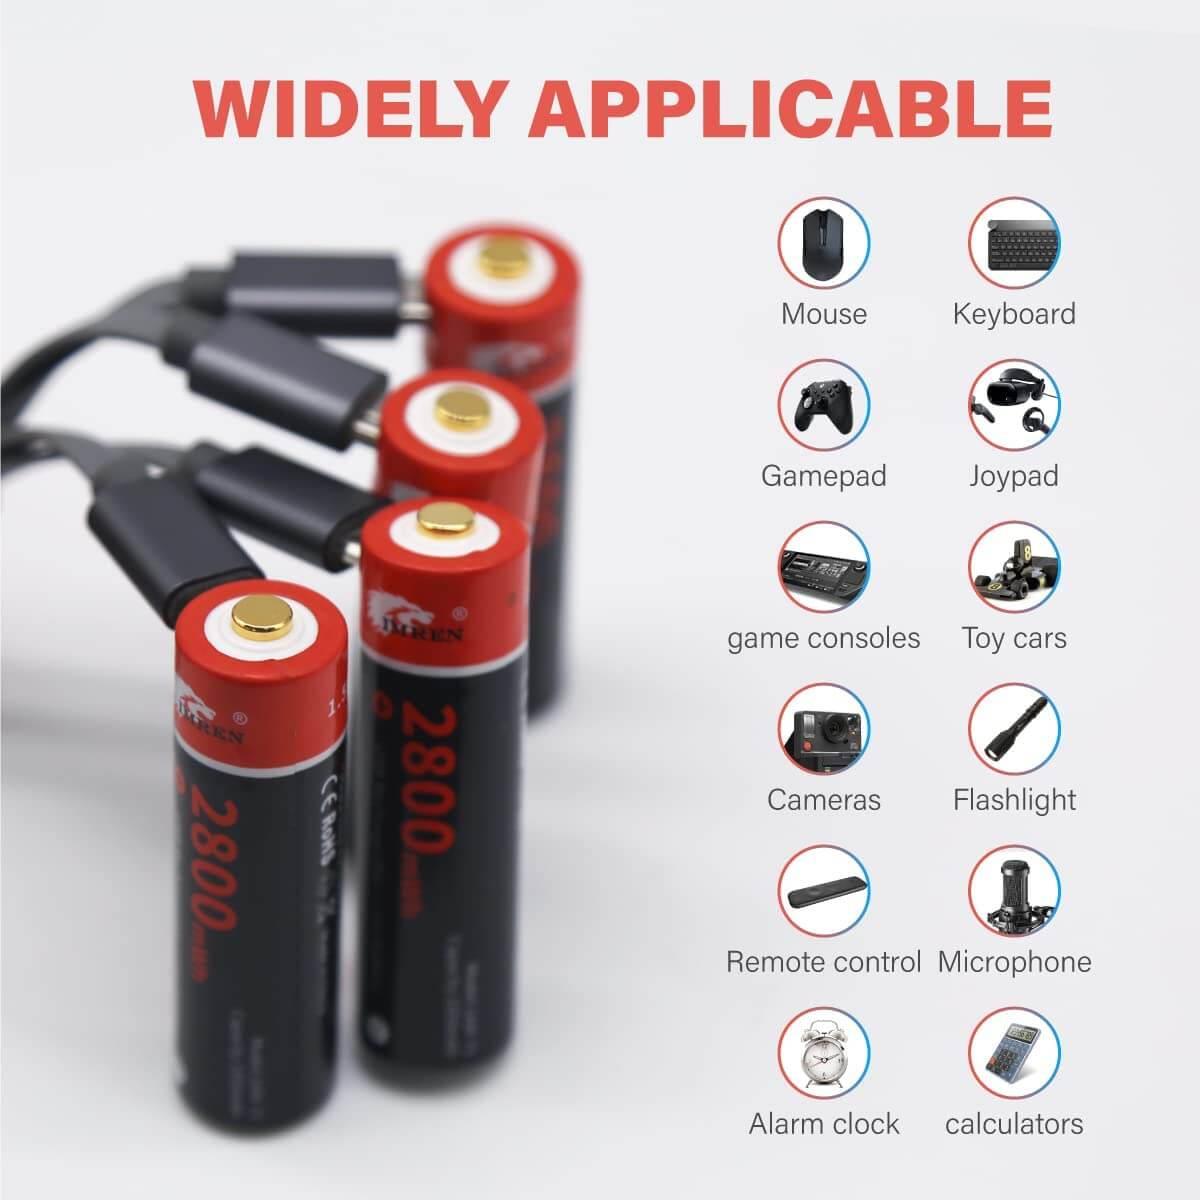 IMREN AA Battery,Rechargeable AA Lithium Batteries 1.5V 2800mWh, Over 1200 Cycles, 4 in 1 Micro USB Cable,4-Pack